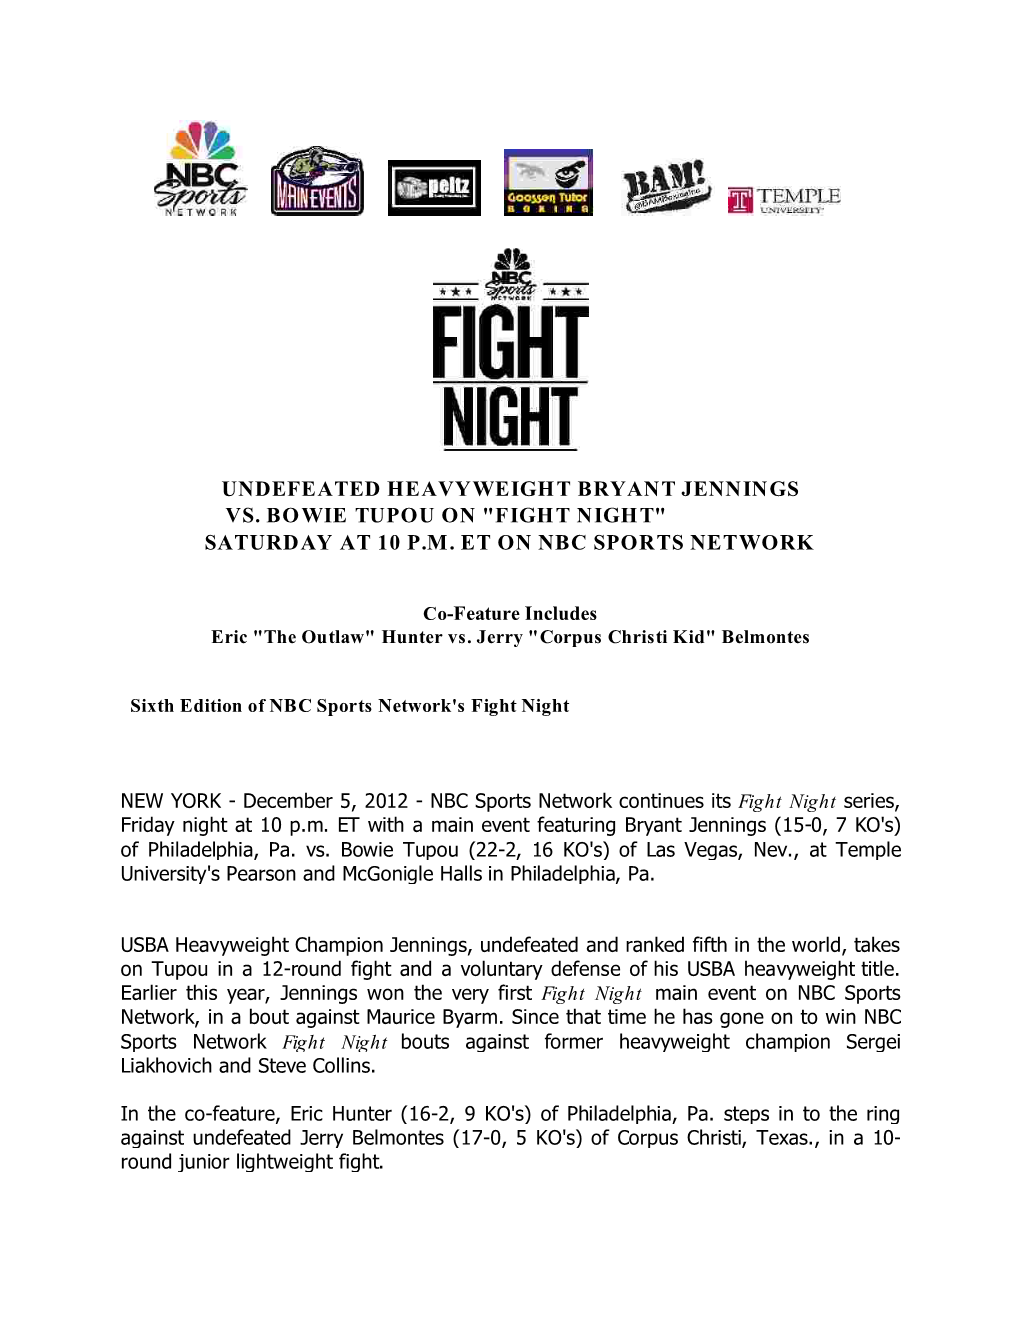 Undefeated Heavyweight Bryant Jennings Vs. Bowie Tupou on "Fight Night" Saturday at 10 P.M